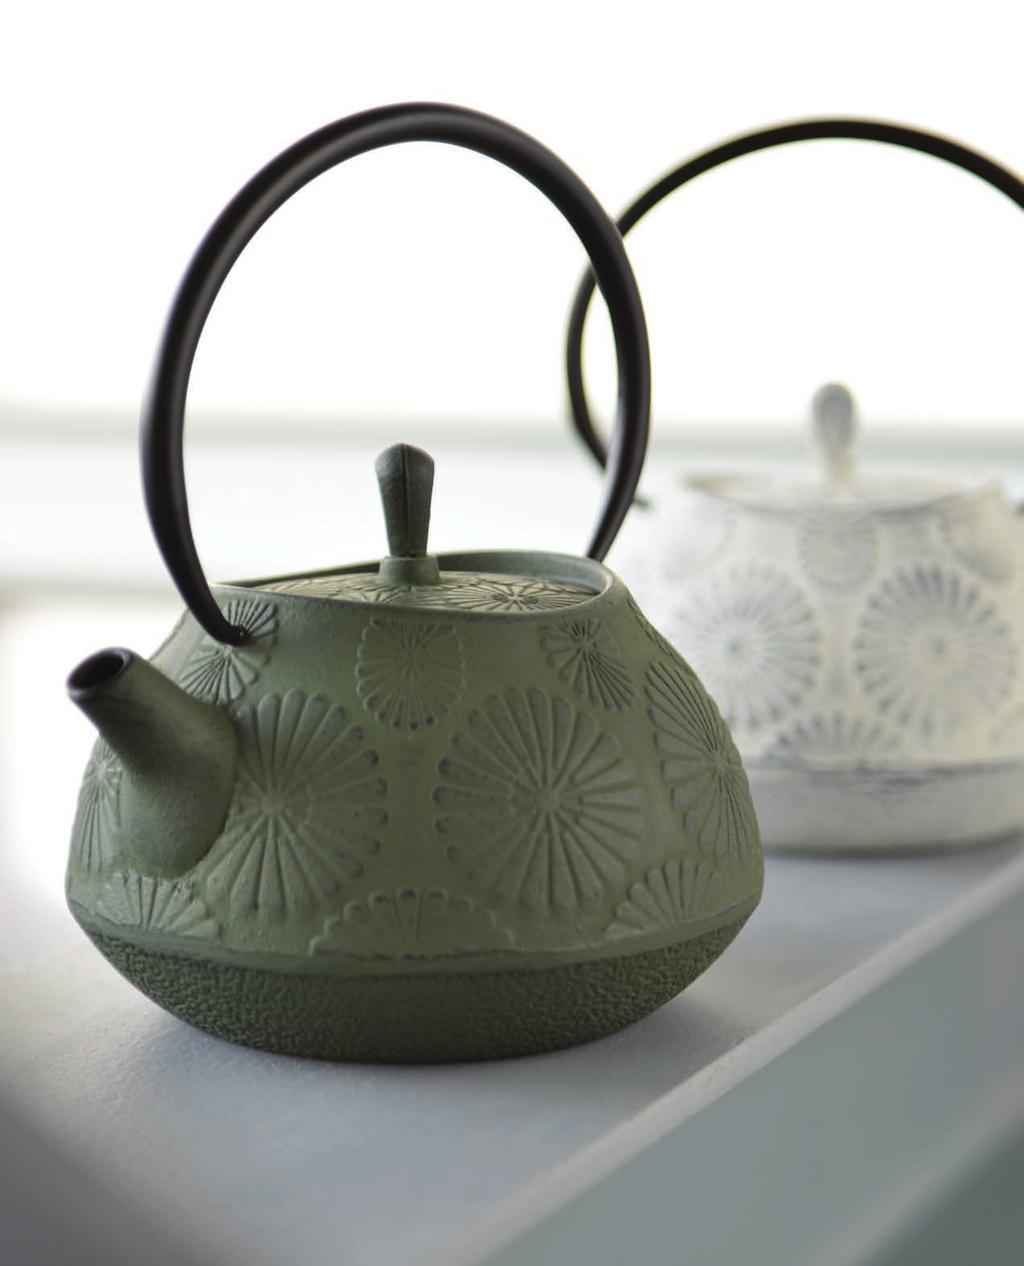 Tips to fully enjoy your tea: ❶ Boil water in a kettle or suitable pot (due to the nature of this tea pot, it s not intended to be used on a stove top).